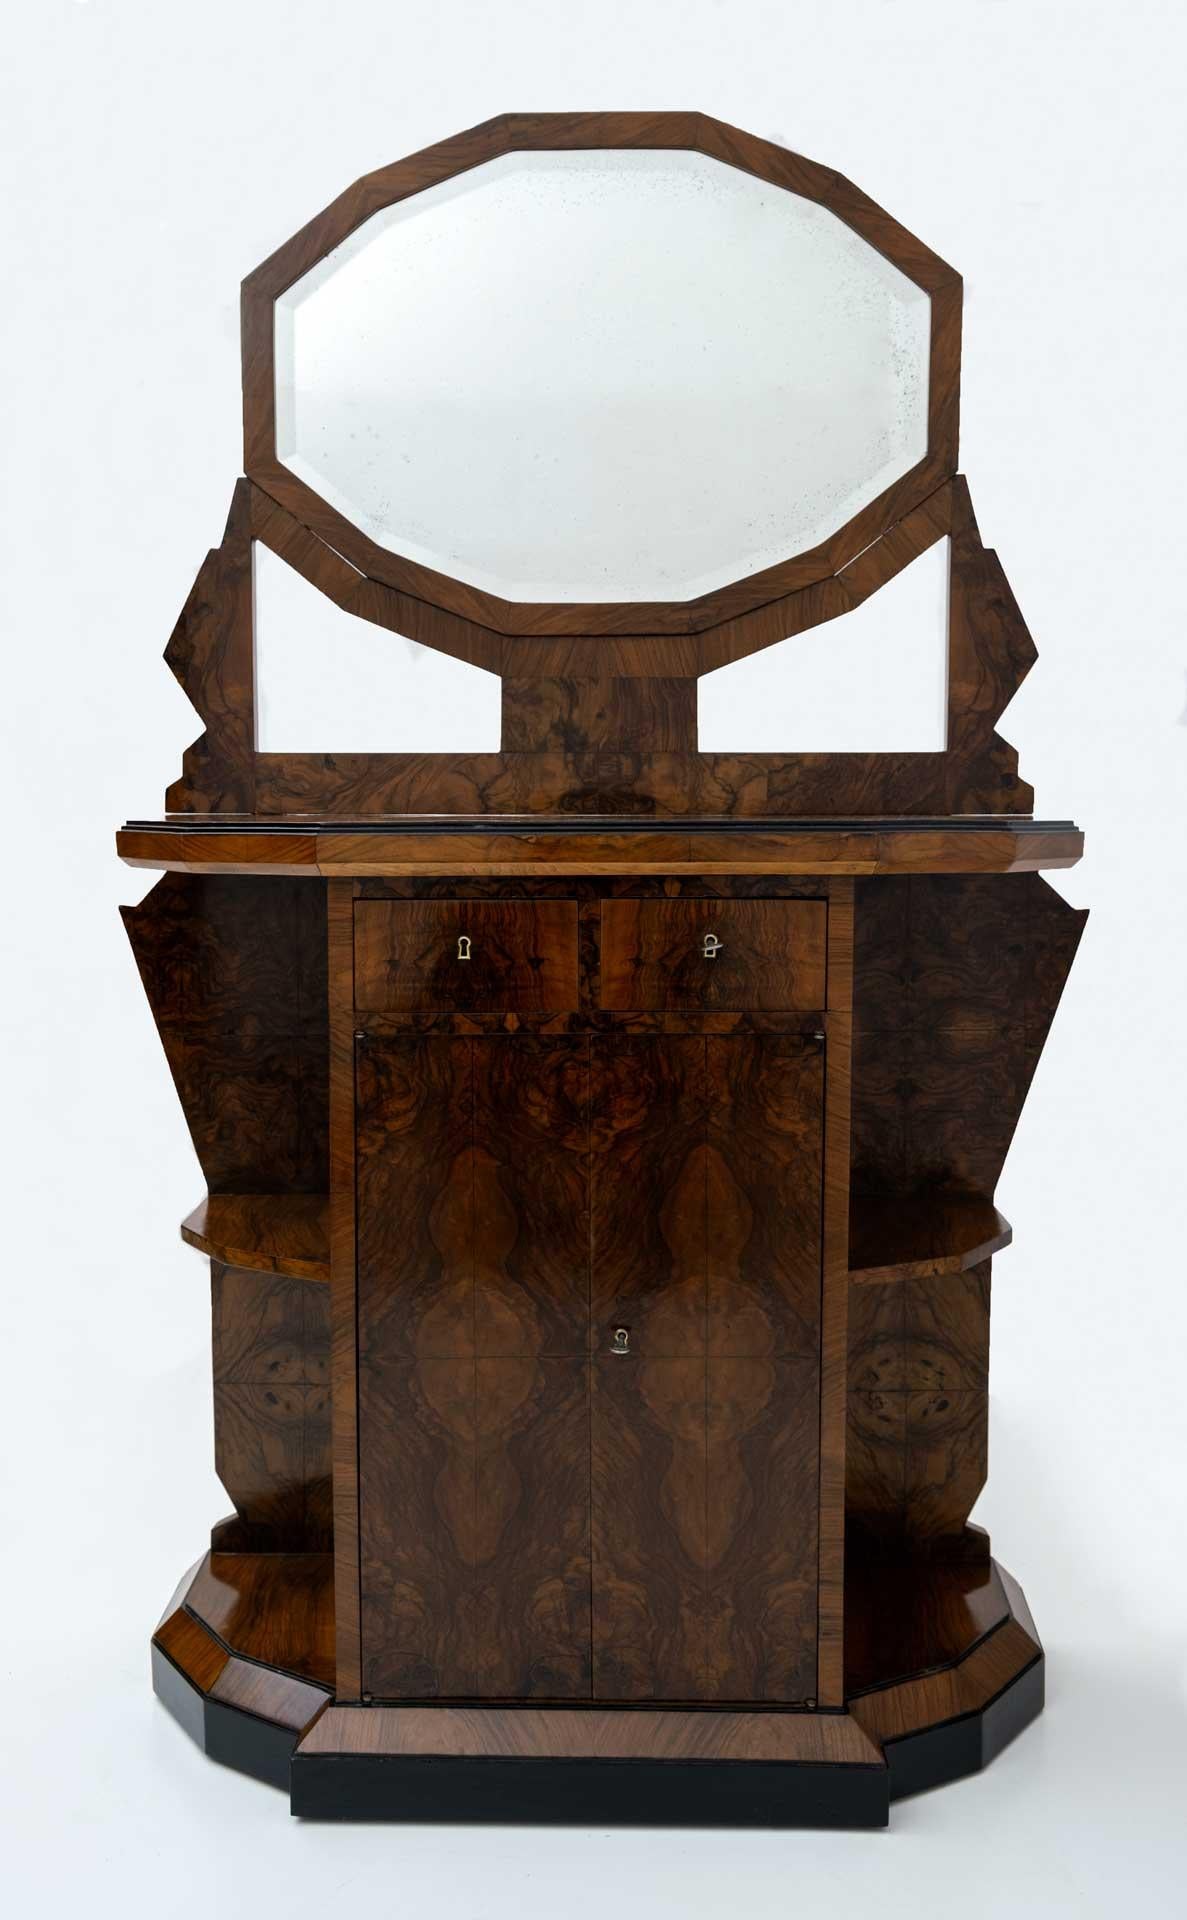 Art Deco sideboard or dressing table with mirror, early 20th century. Made of walnut briar, composed of a base with two doors and two drawers, which can also be used without the mirror. The base without the mirror measures H95 x W110 x D40